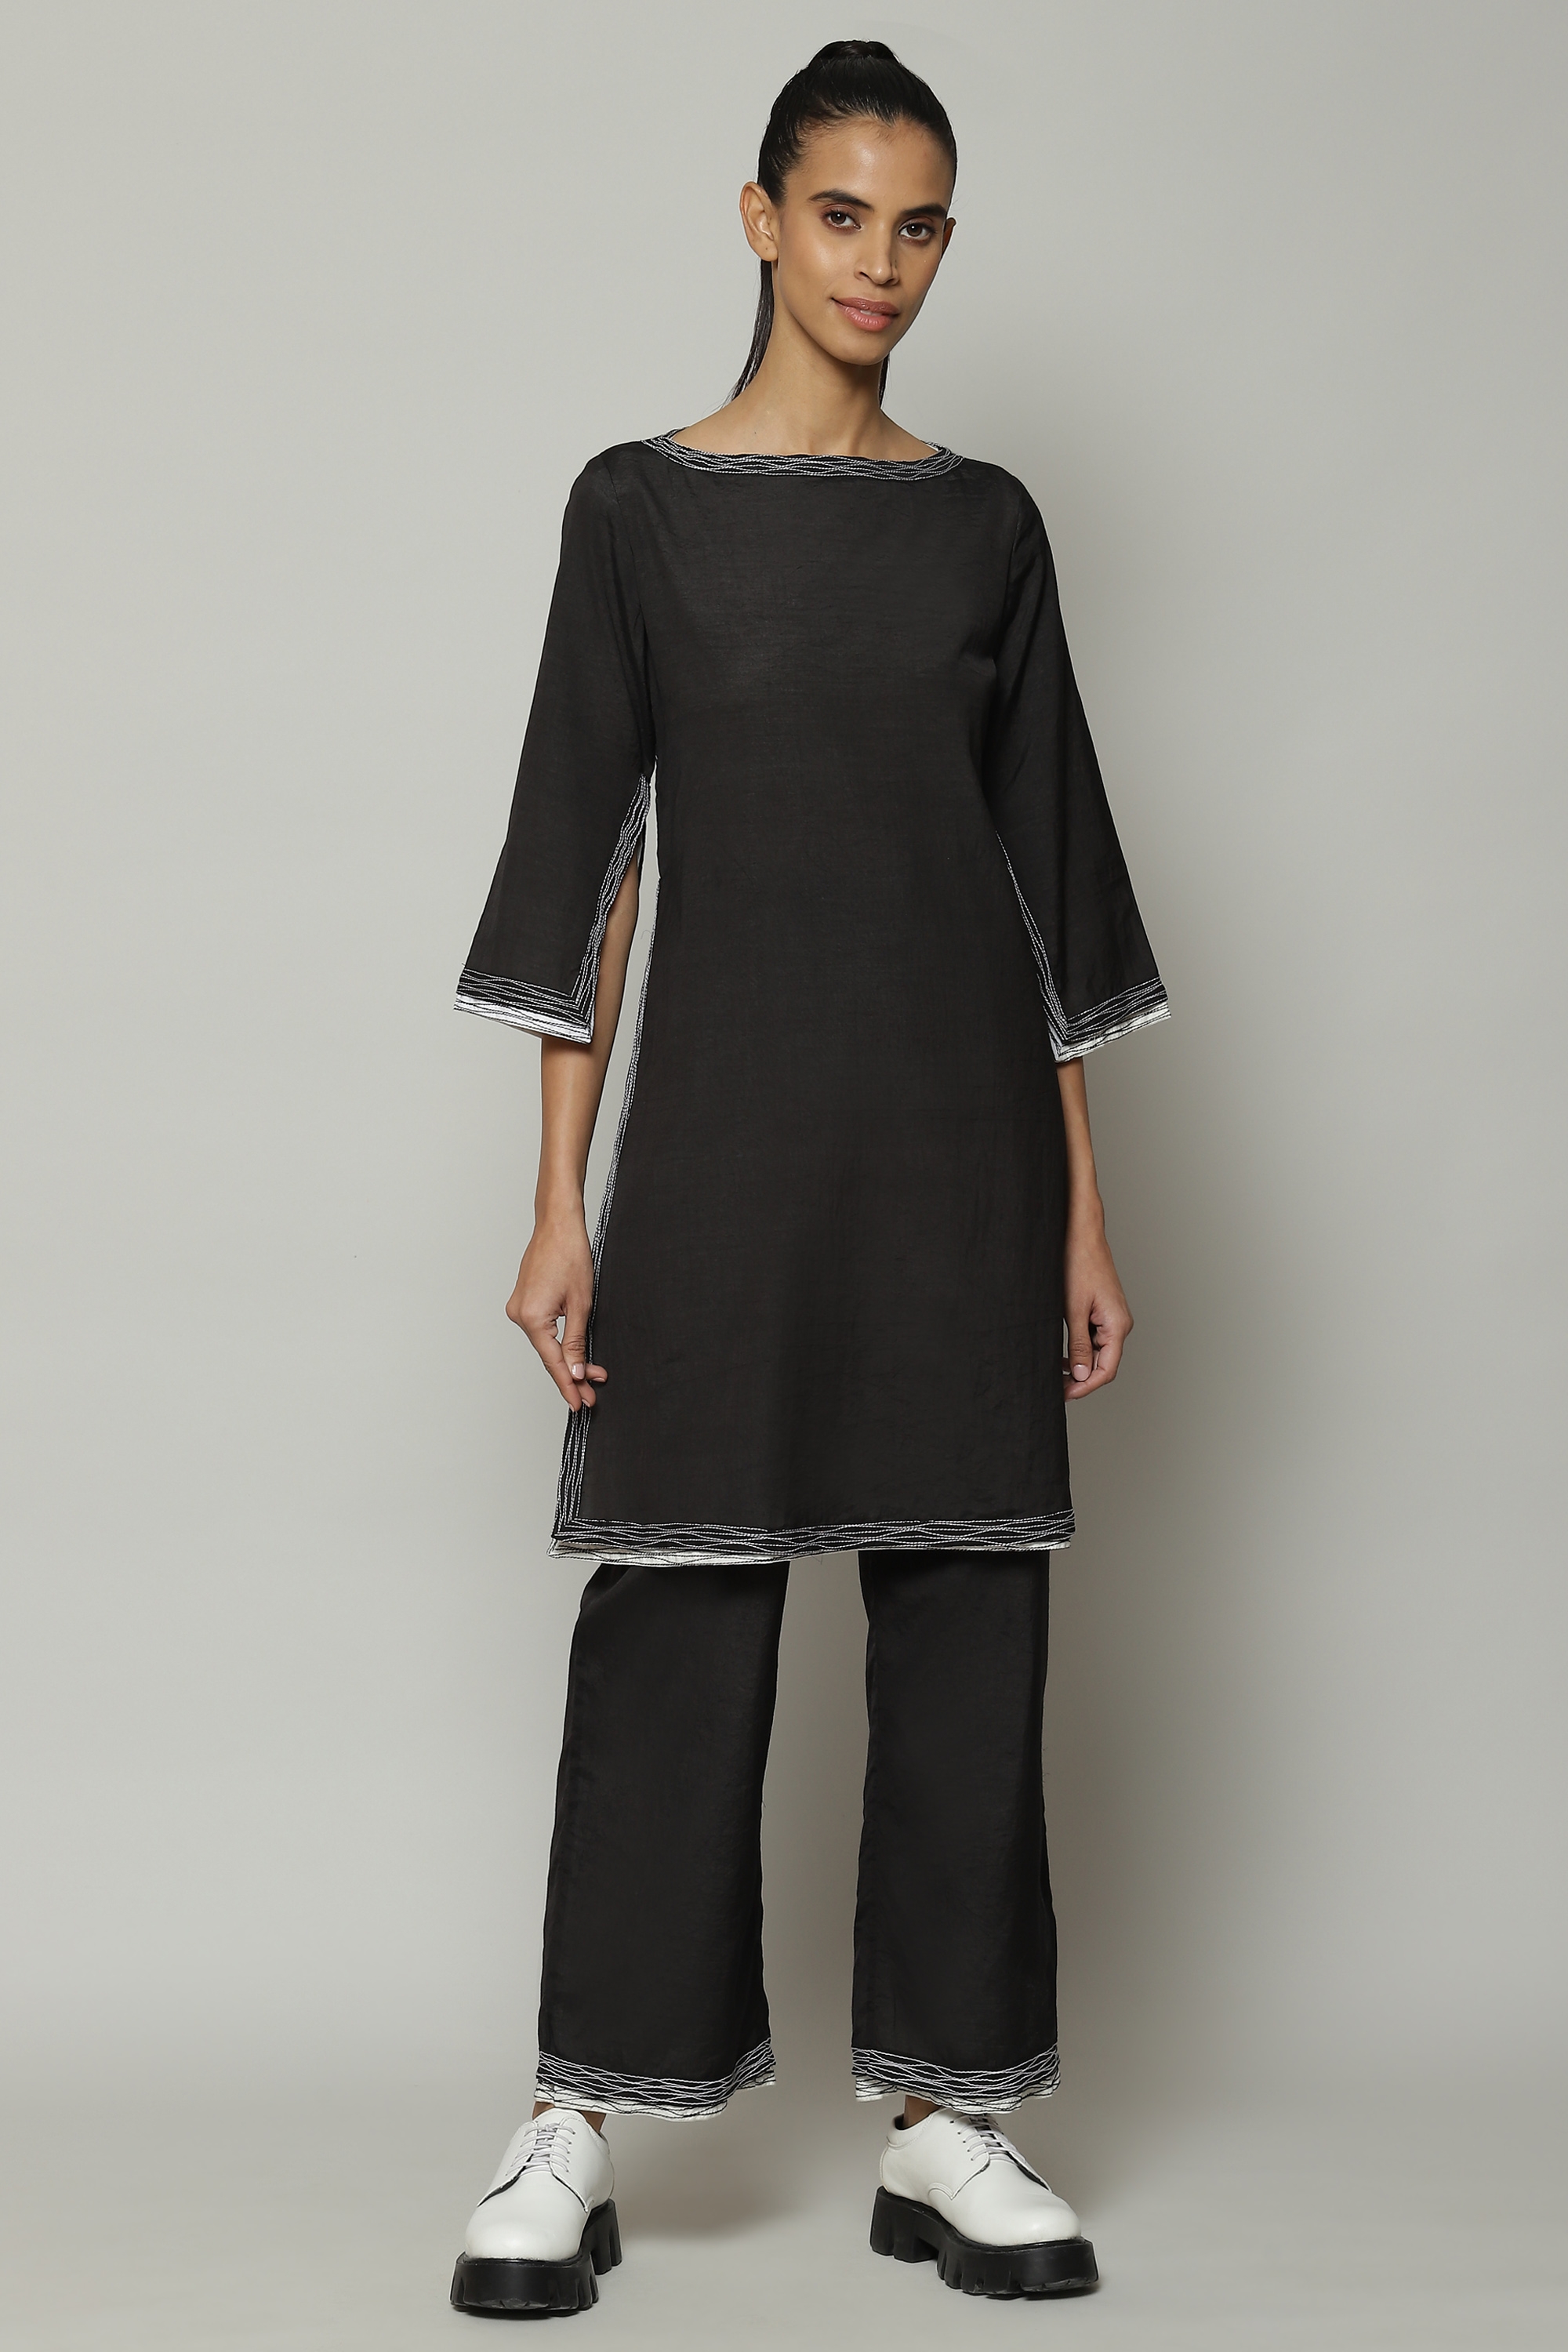 ABRAHAM AND THAKORE | Double Sheer Luxe Voile Kurta Black